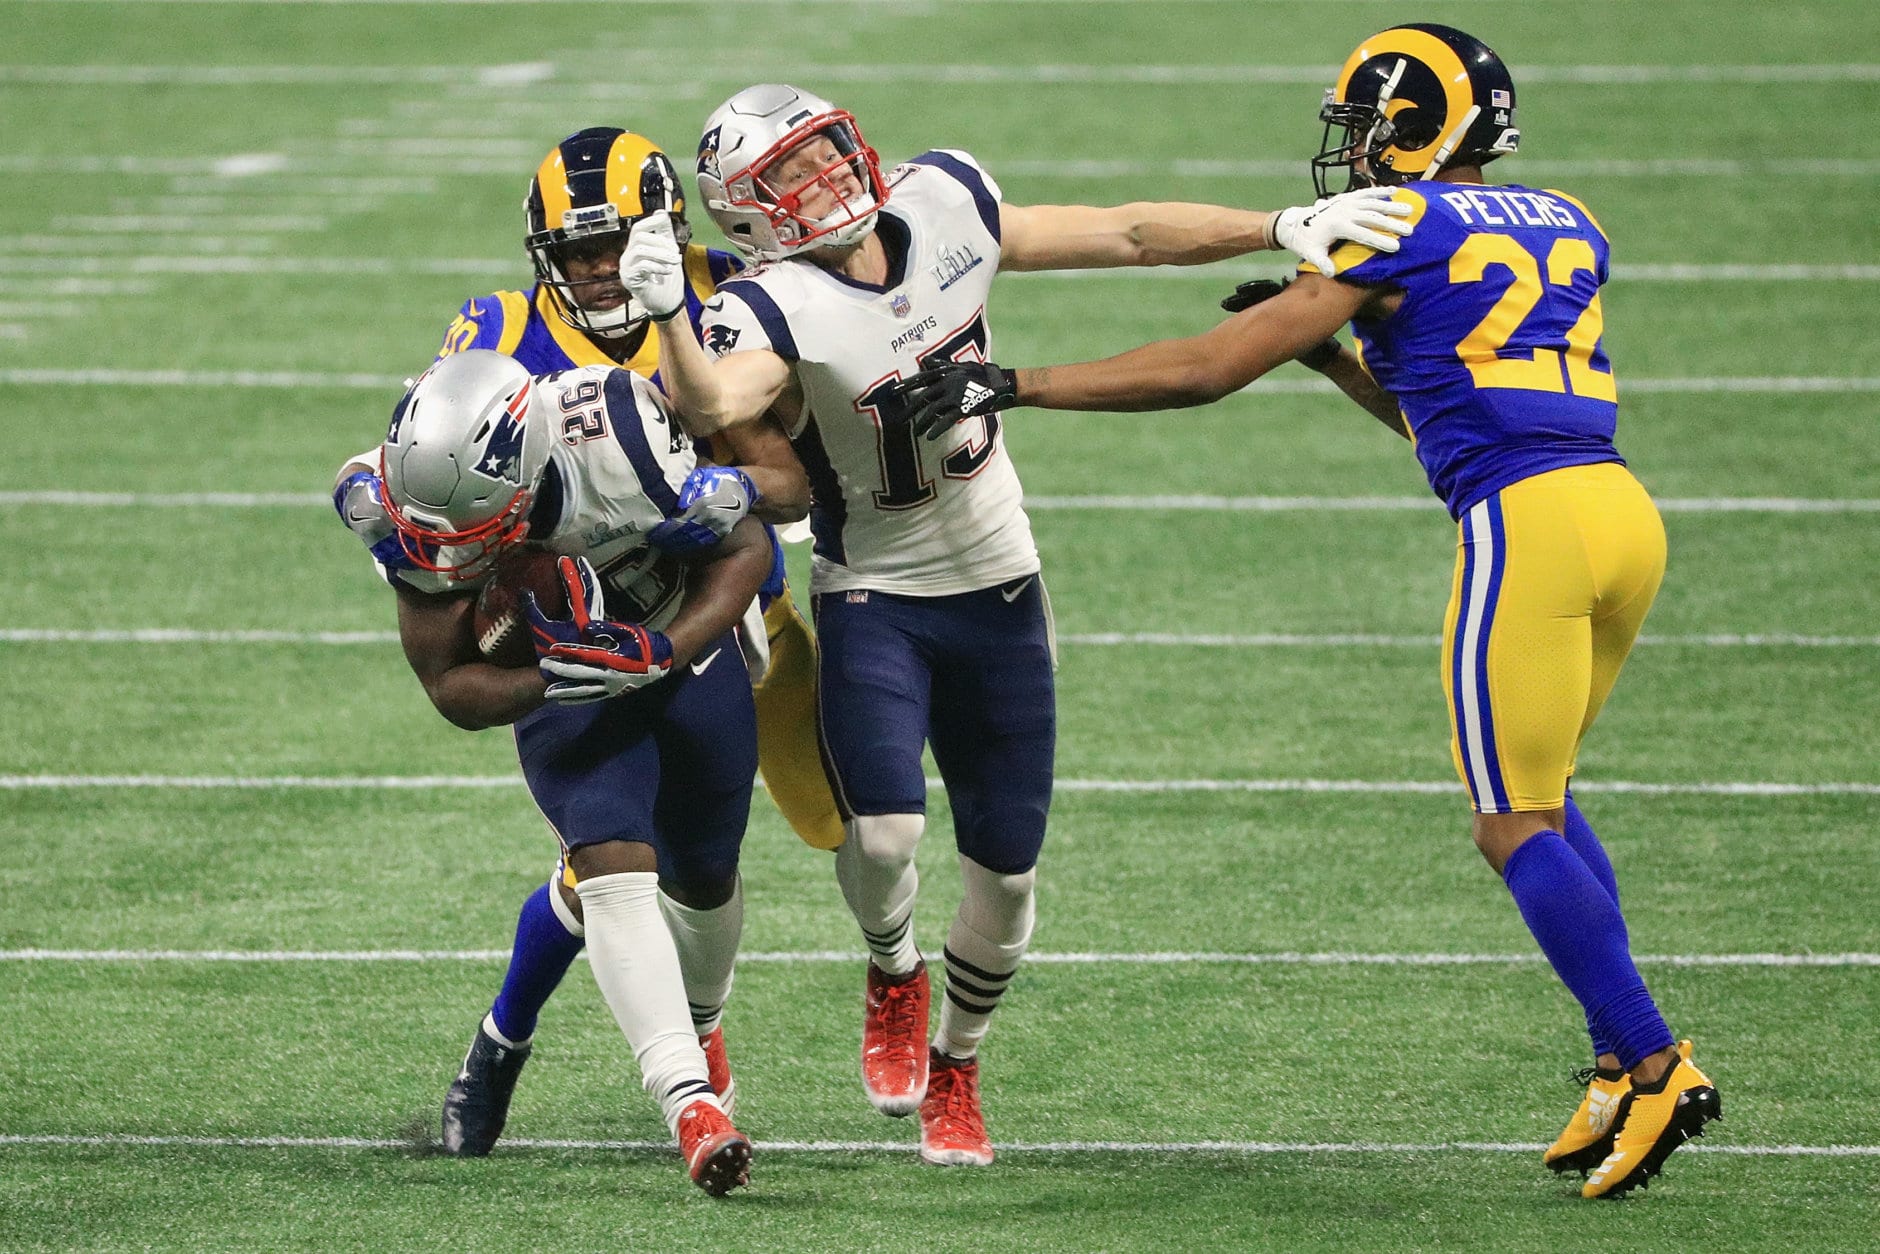 ATLANTA, GA - FEBRUARY 03: Sony Michel #26 of the New England Patriots runs the ball against the Los Angeles Rams in the second half during Super Bowl LIII at Mercedes-Benz Stadium on February 3, 2019 in Atlanta, Georgia.  (Photo by Mike Ehrmann/Getty Images)